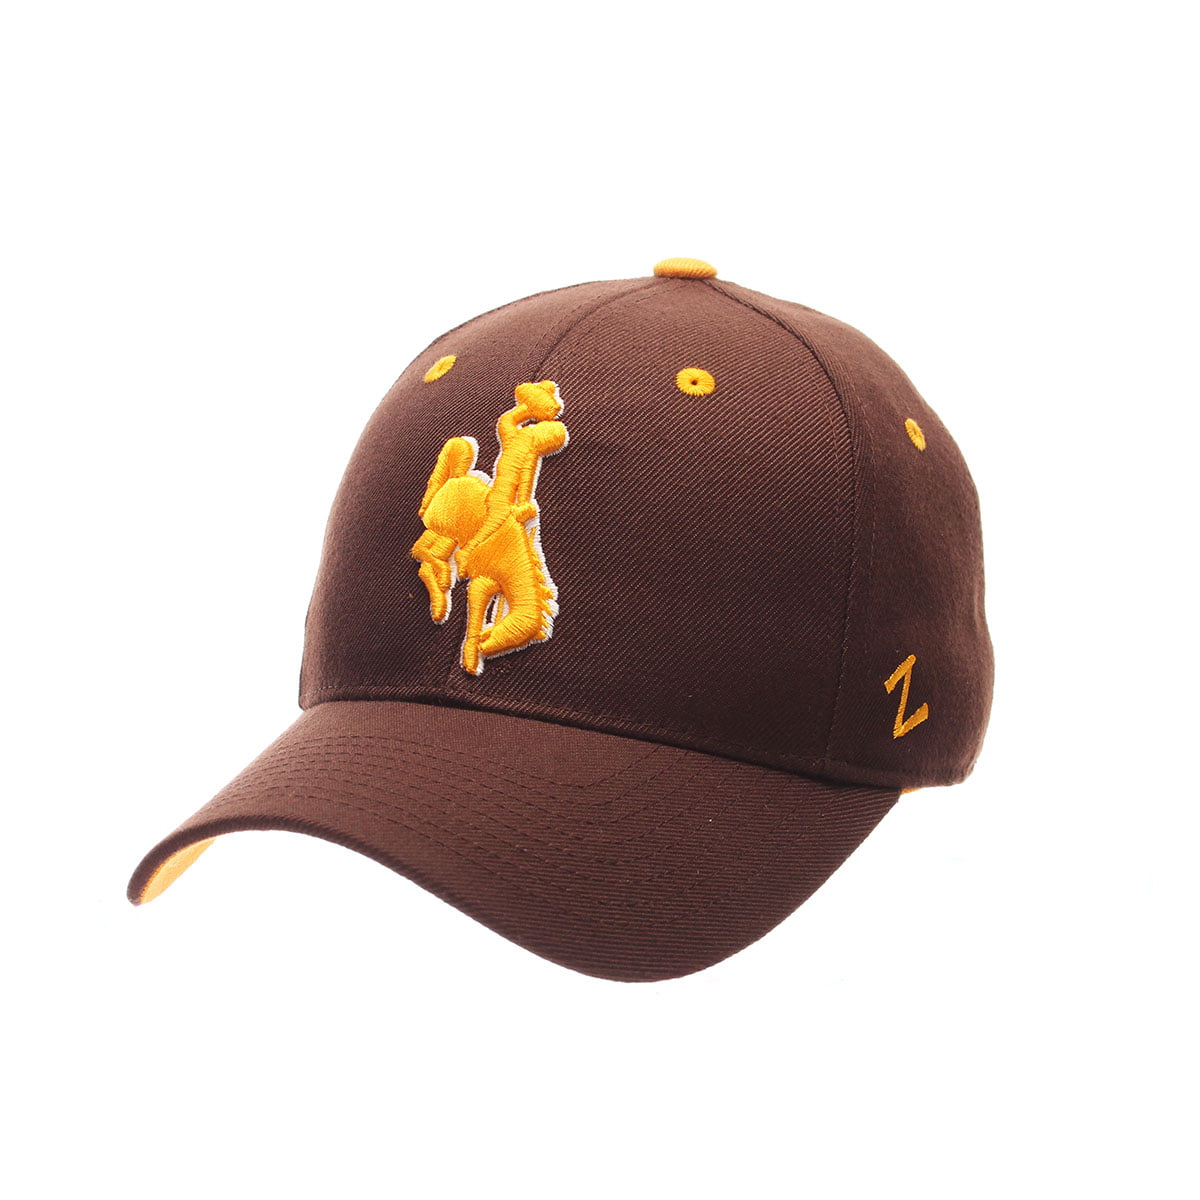 Wyoming Cowboys DH Fitted Hat (Brown) - Walmart.com - Walmart.com